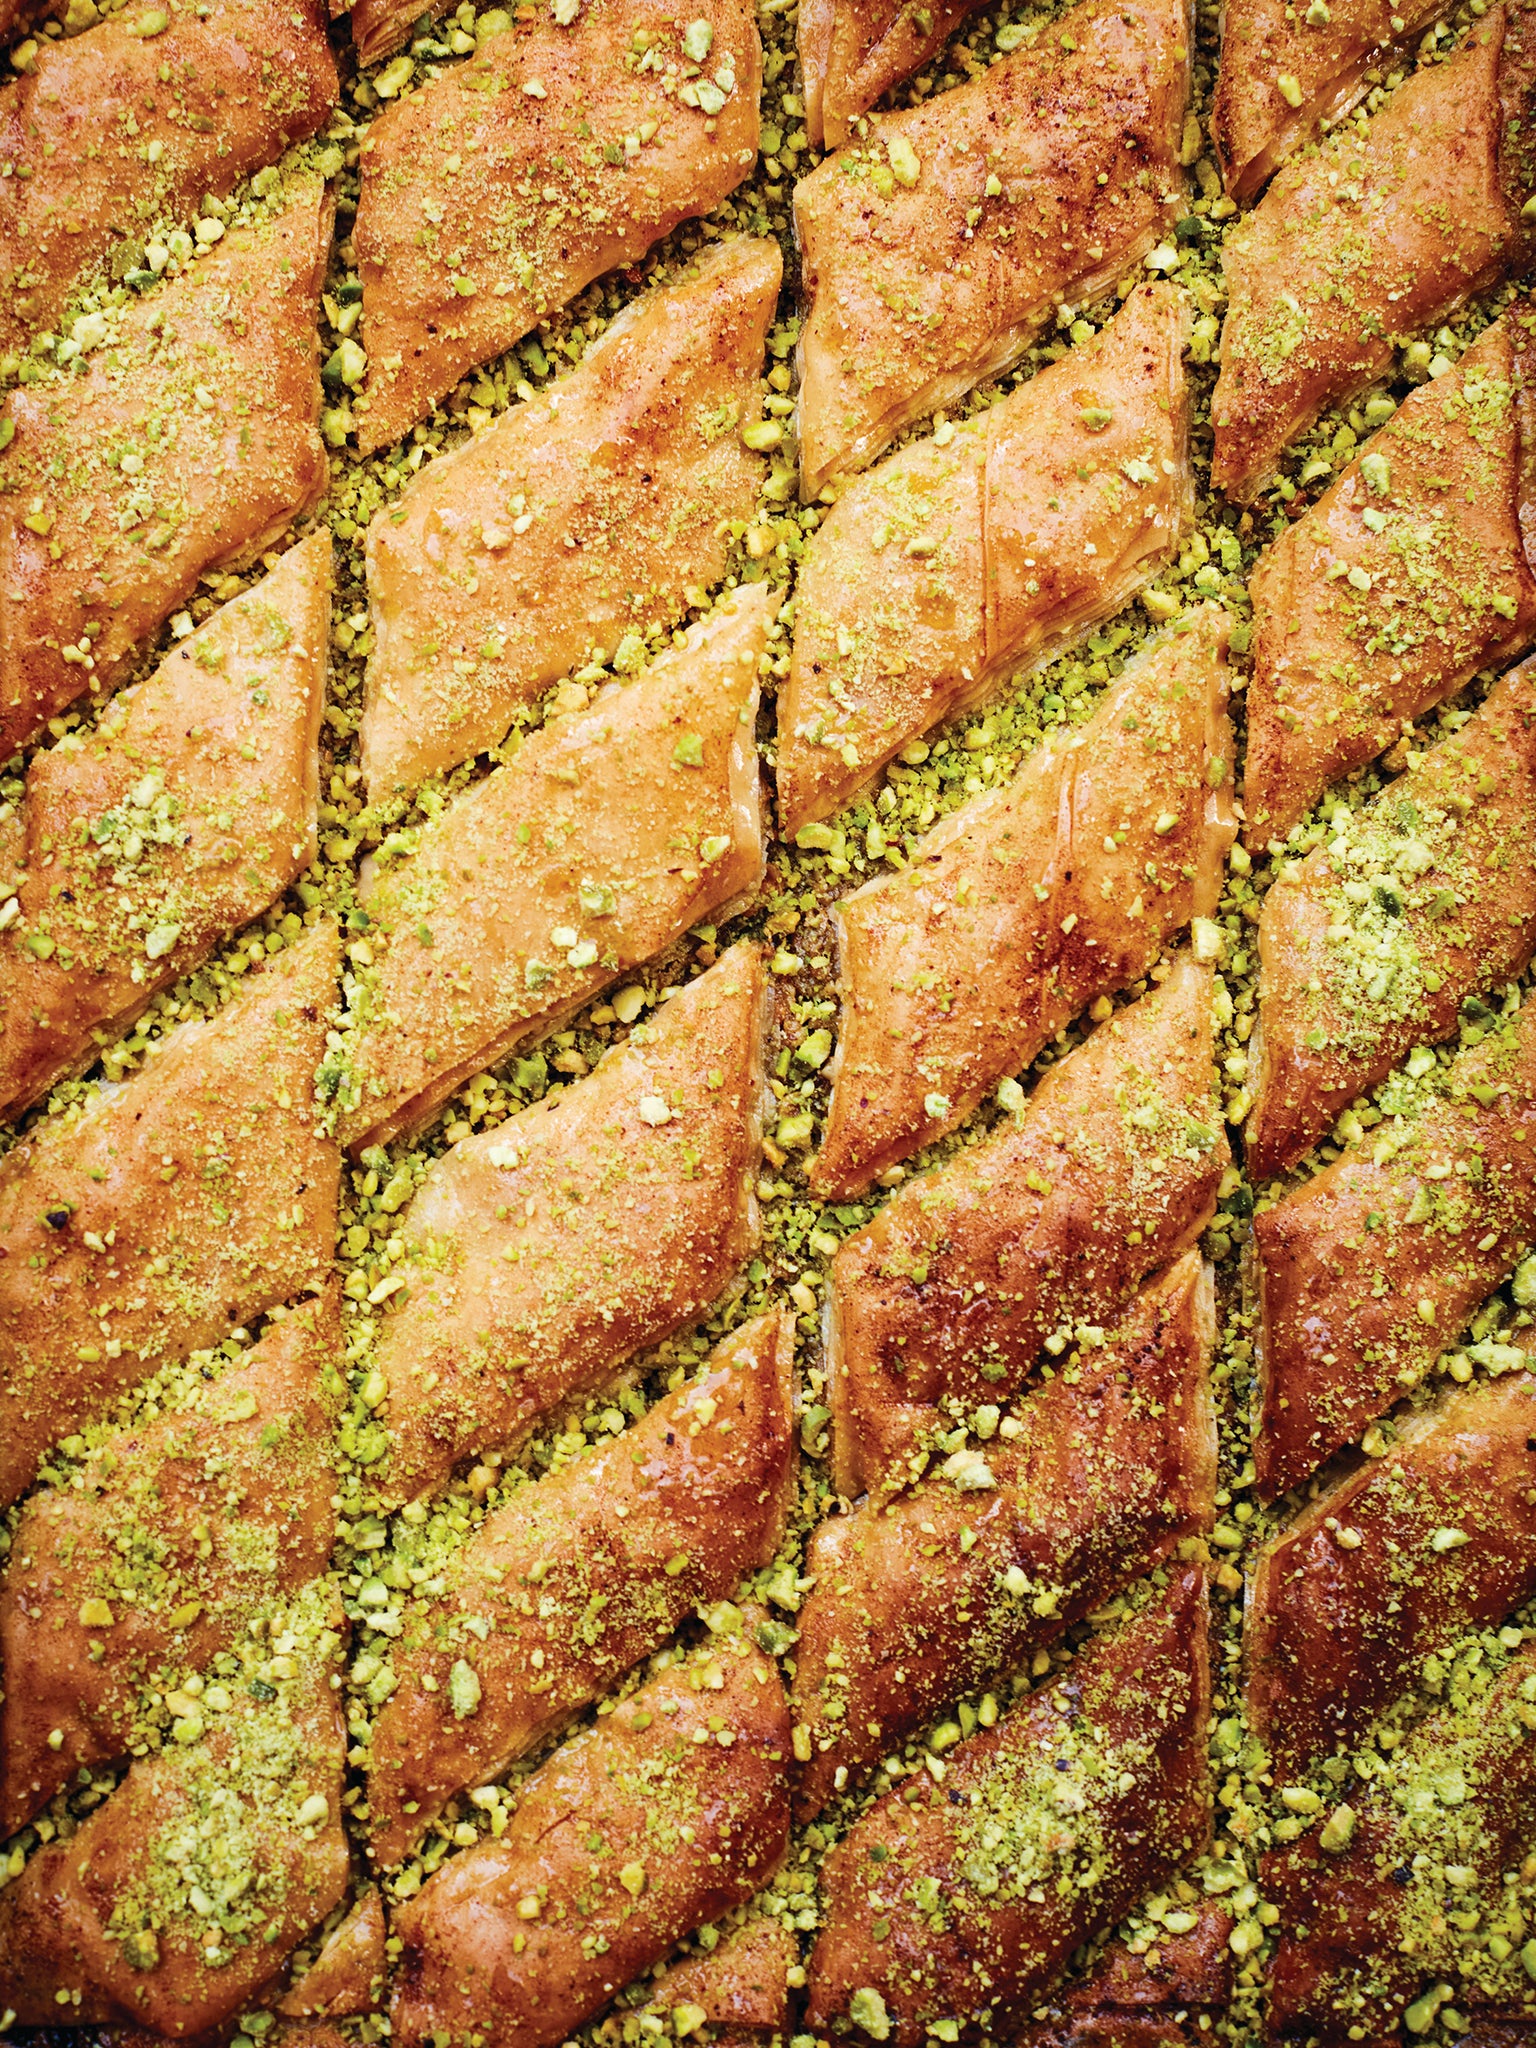 If you’ve only ever had shop-bought baklava, it’s time to make your own